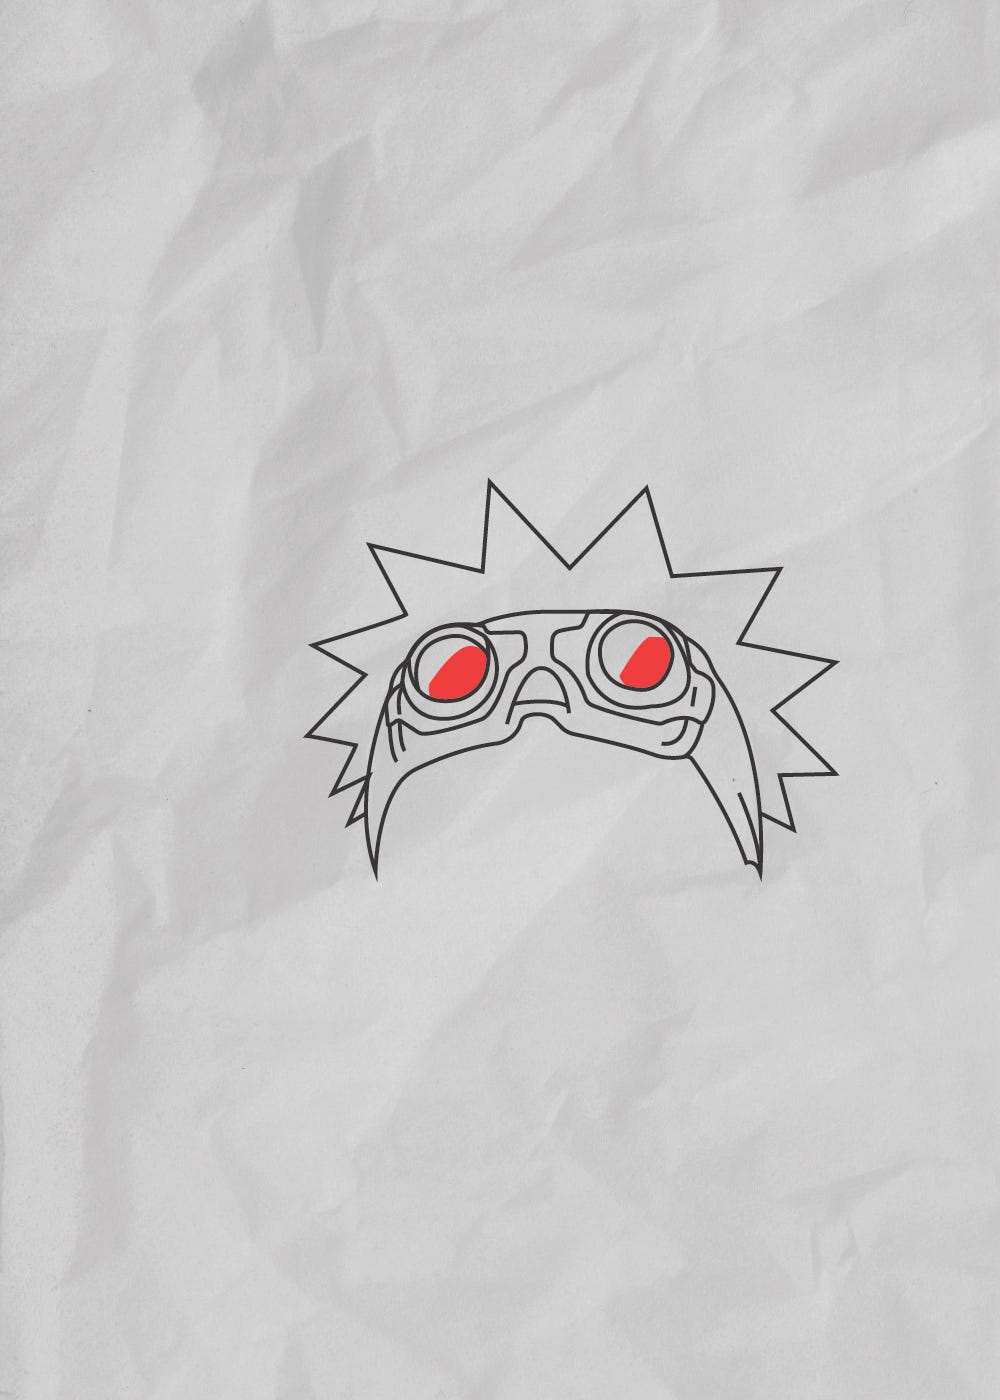 How to Draw Naruto Face  Step by Step - Storiespub - Medium